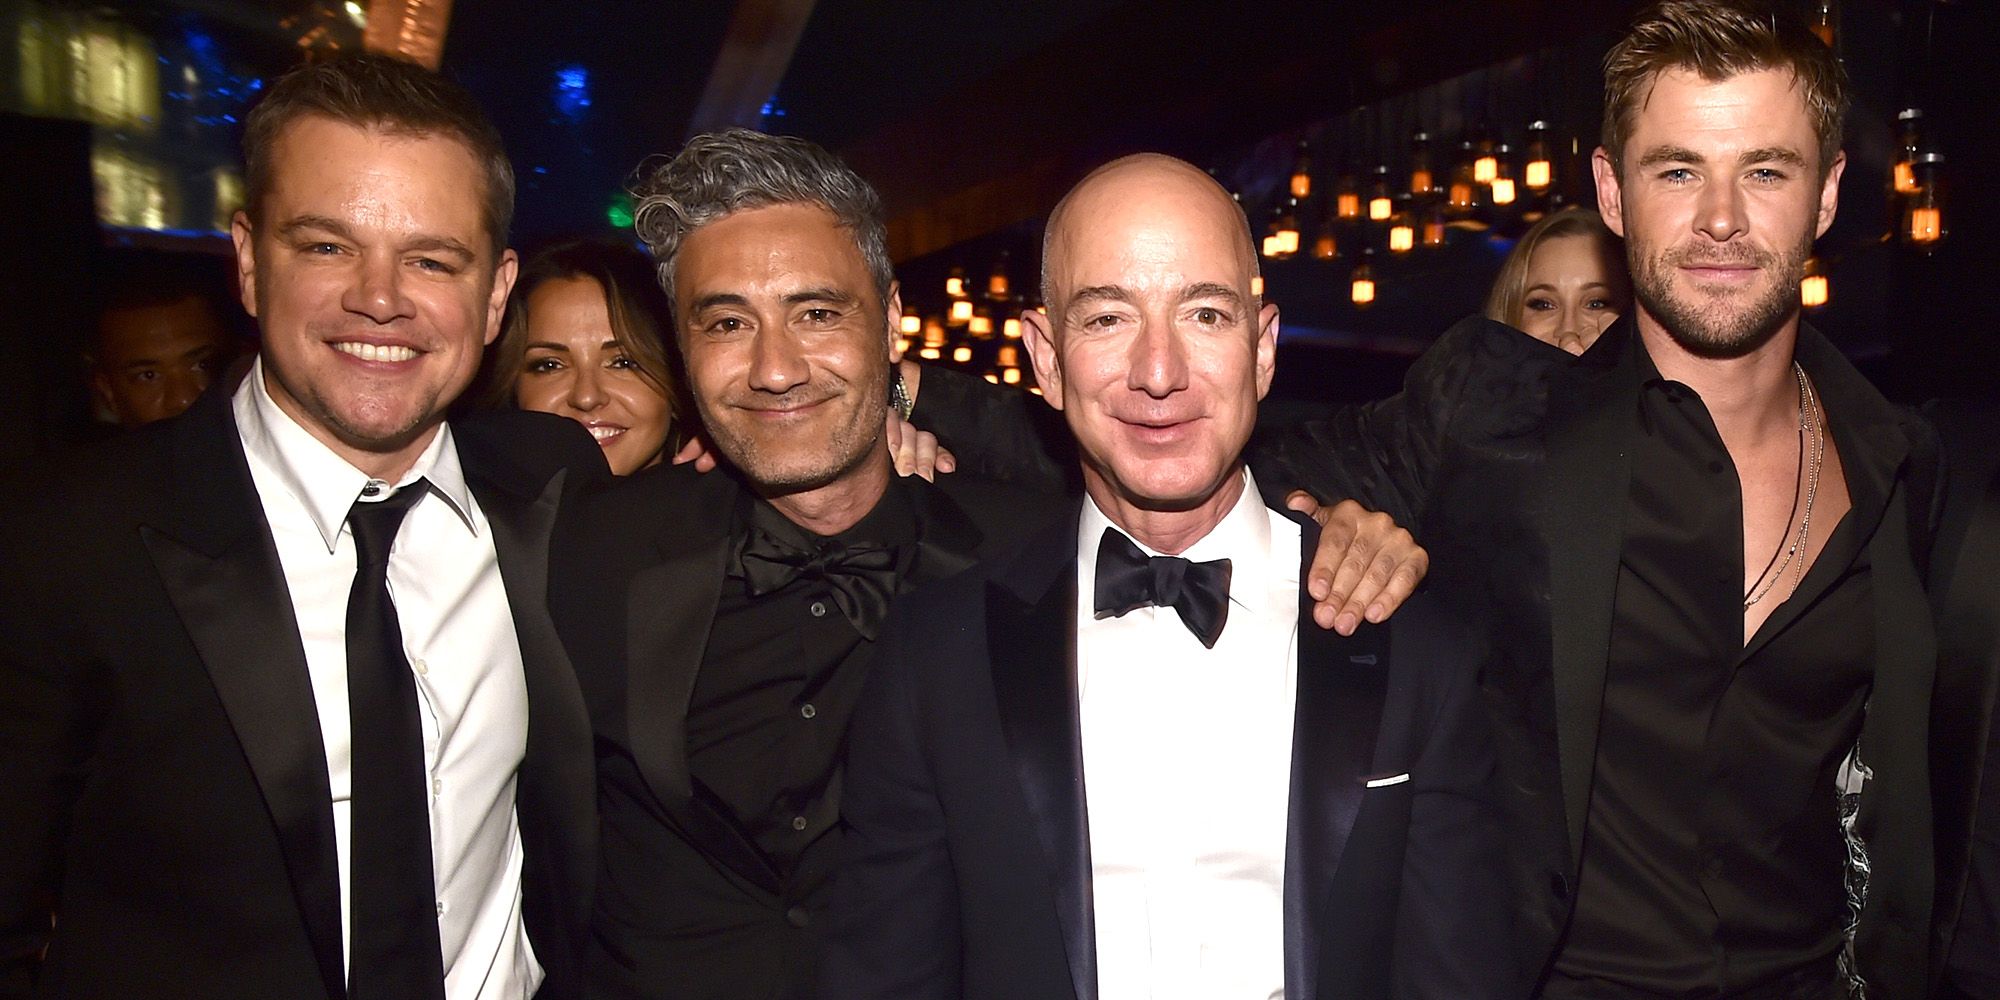 Jeff Bezos is now the richest man in modern history